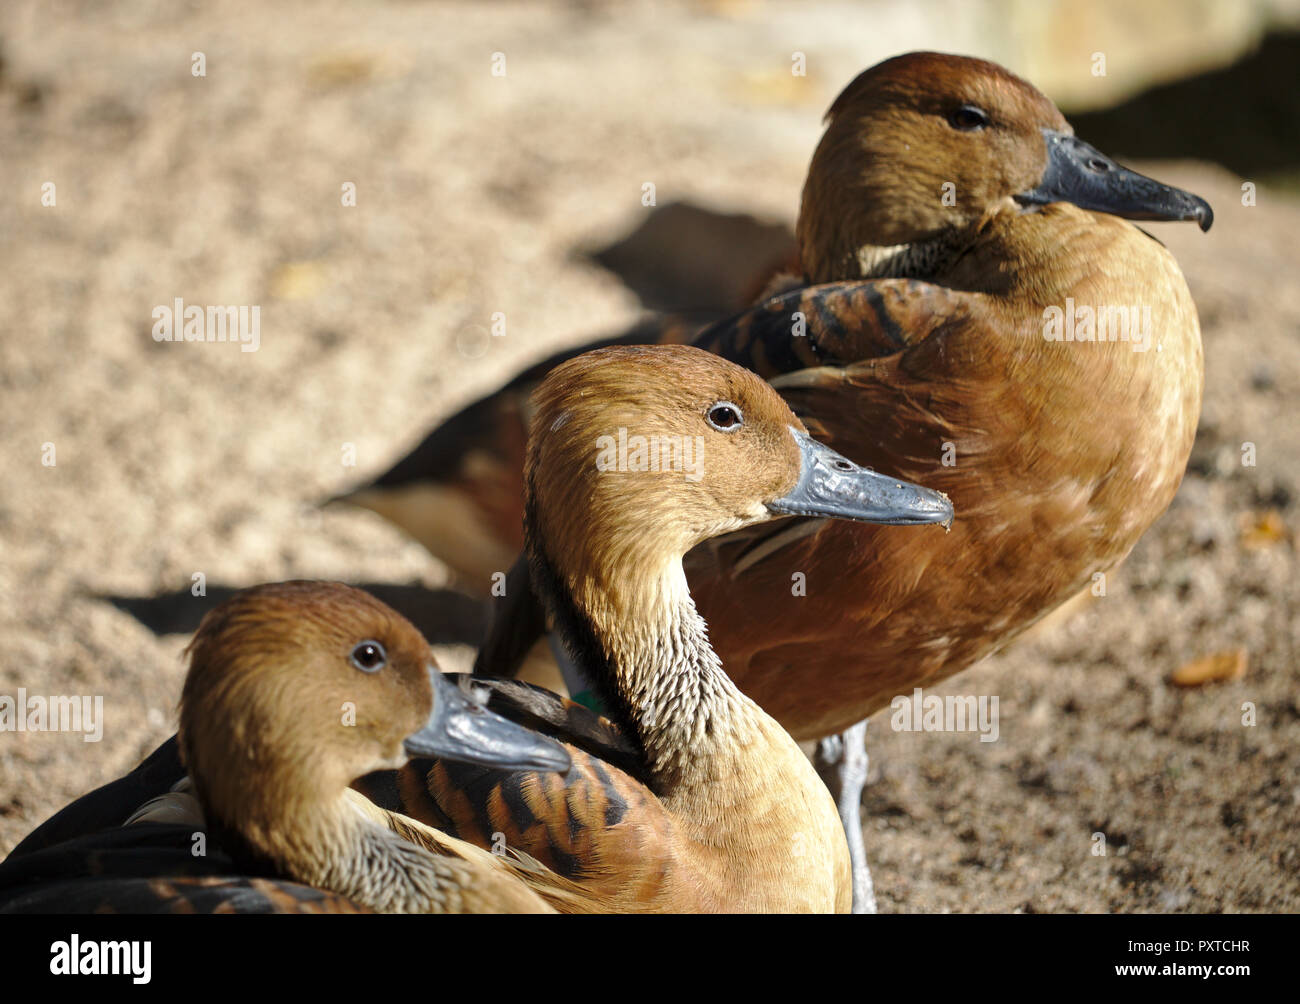 Three West Indian whistling ducks sitting on a beach Stock Photo